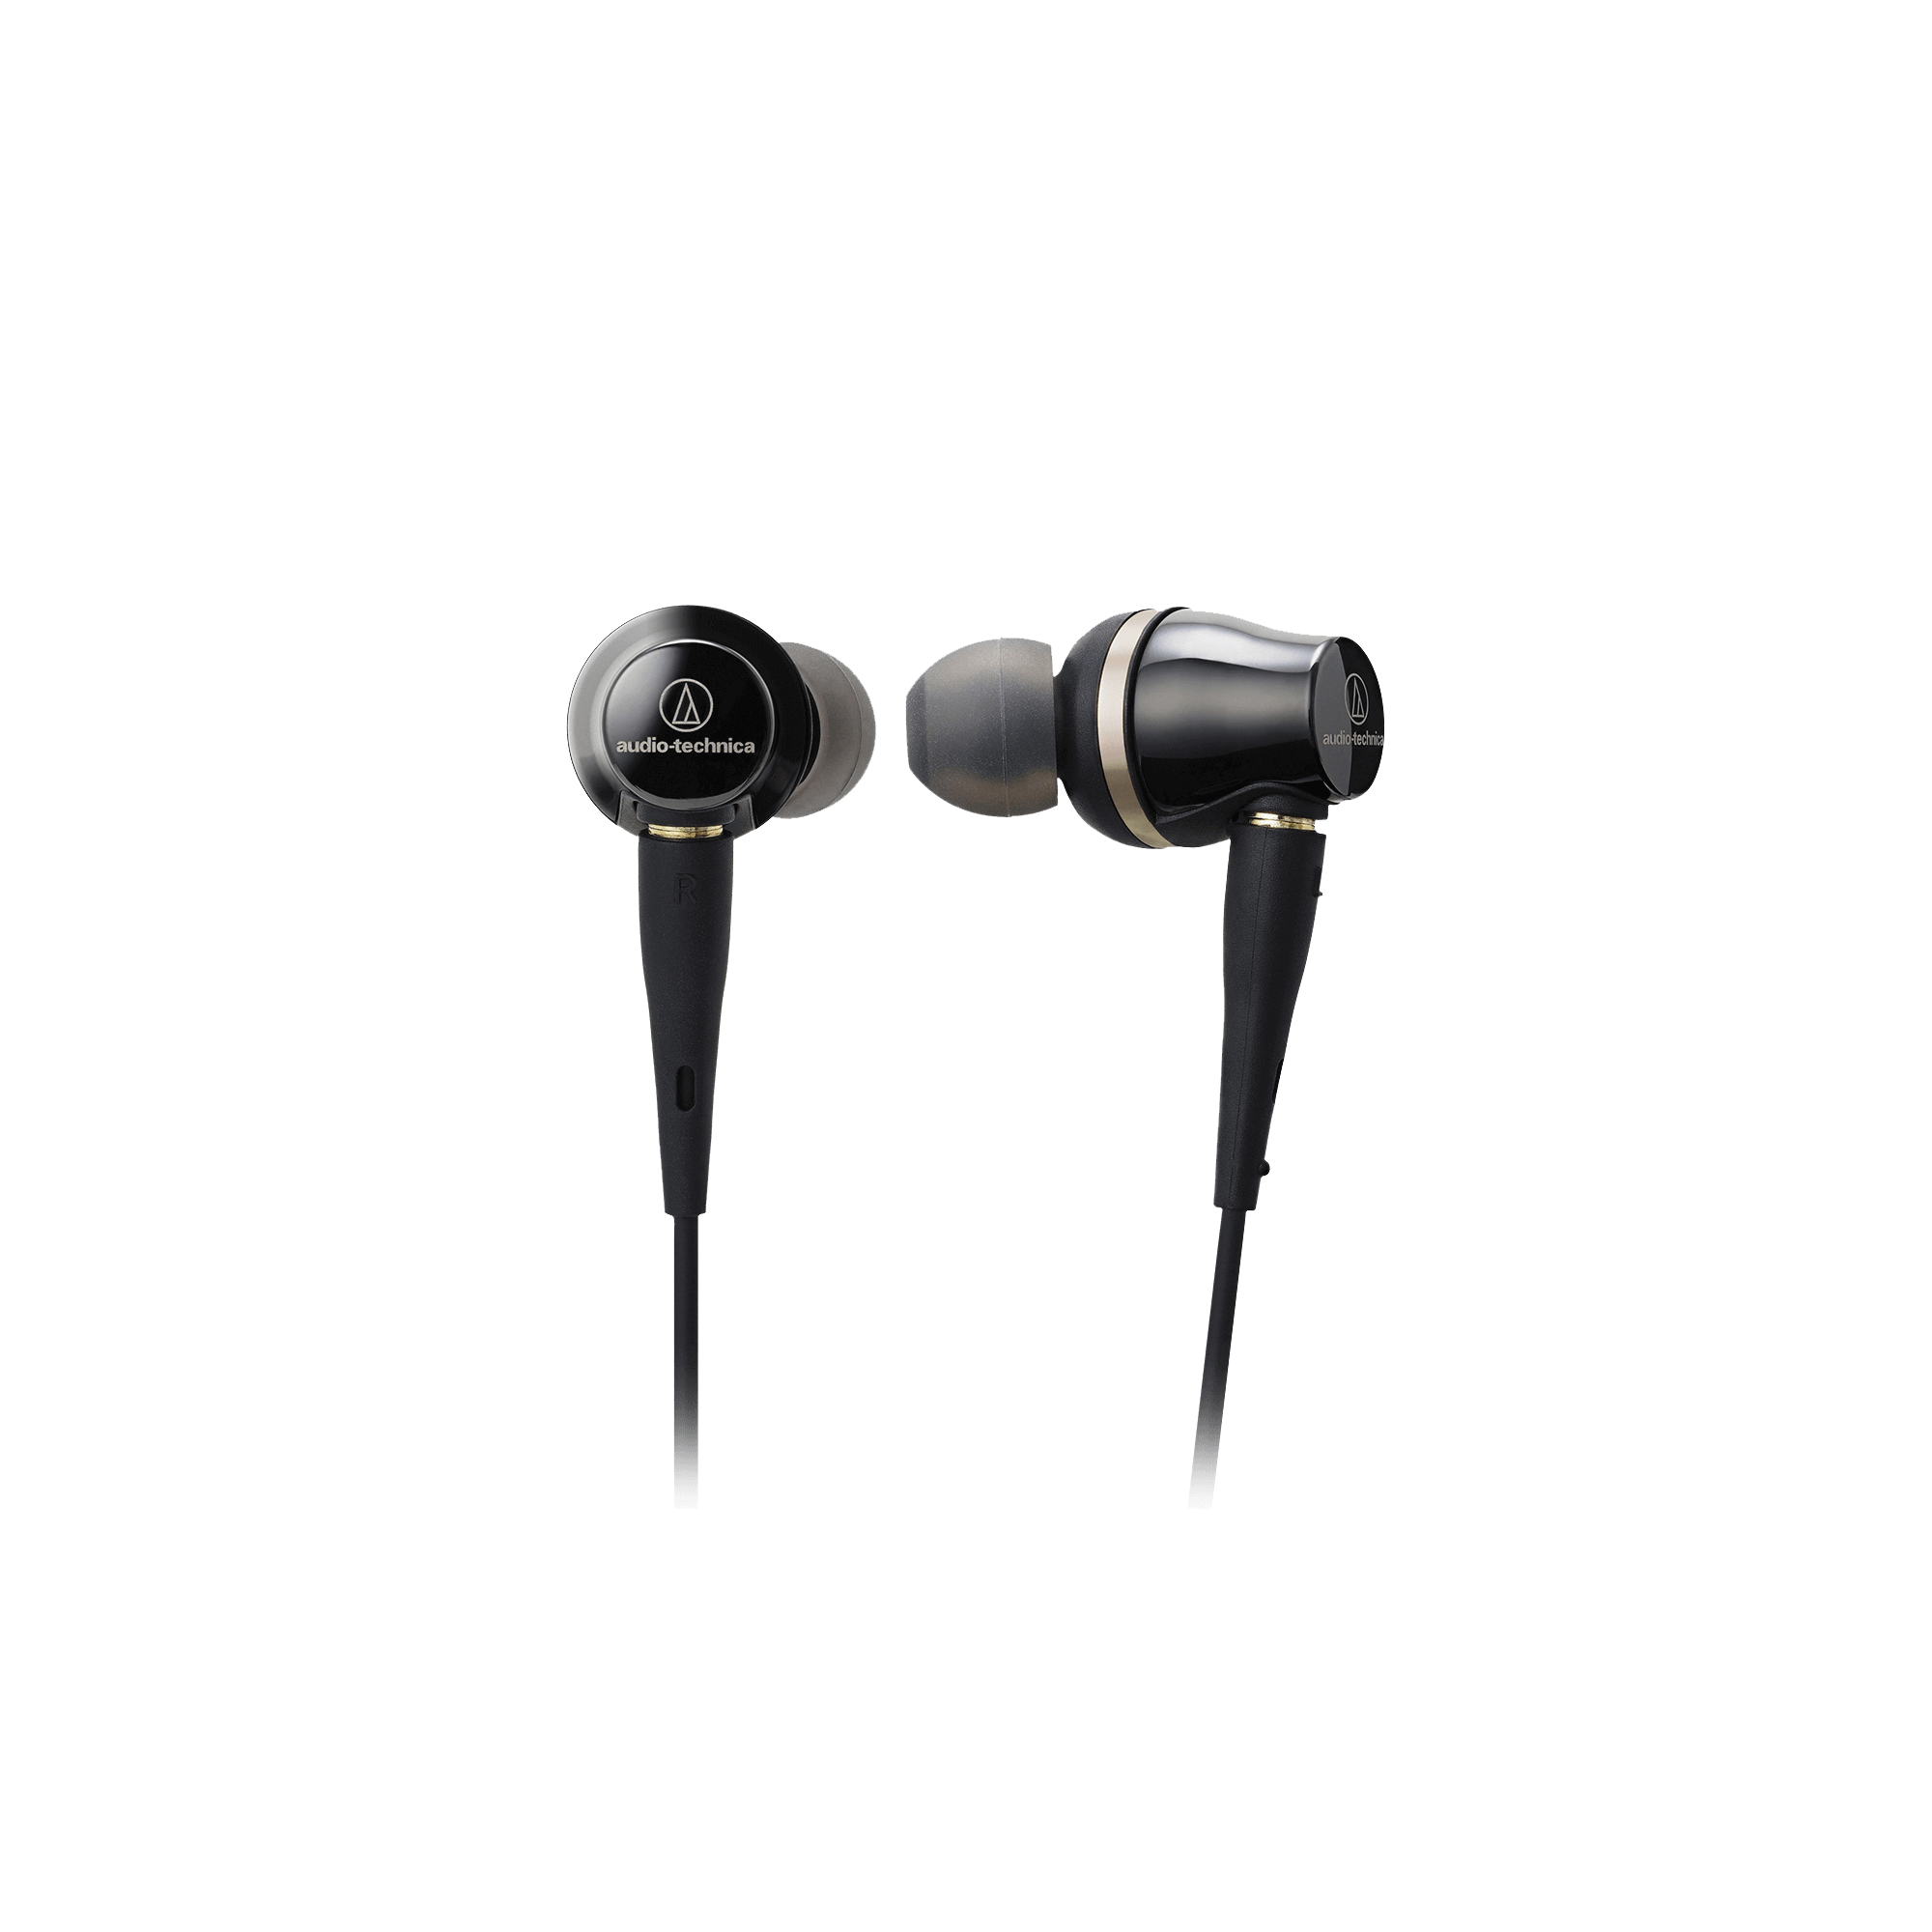 ATH-CKR100iSHigh-Resolution In-Ear Headphones with Dual Phase Push